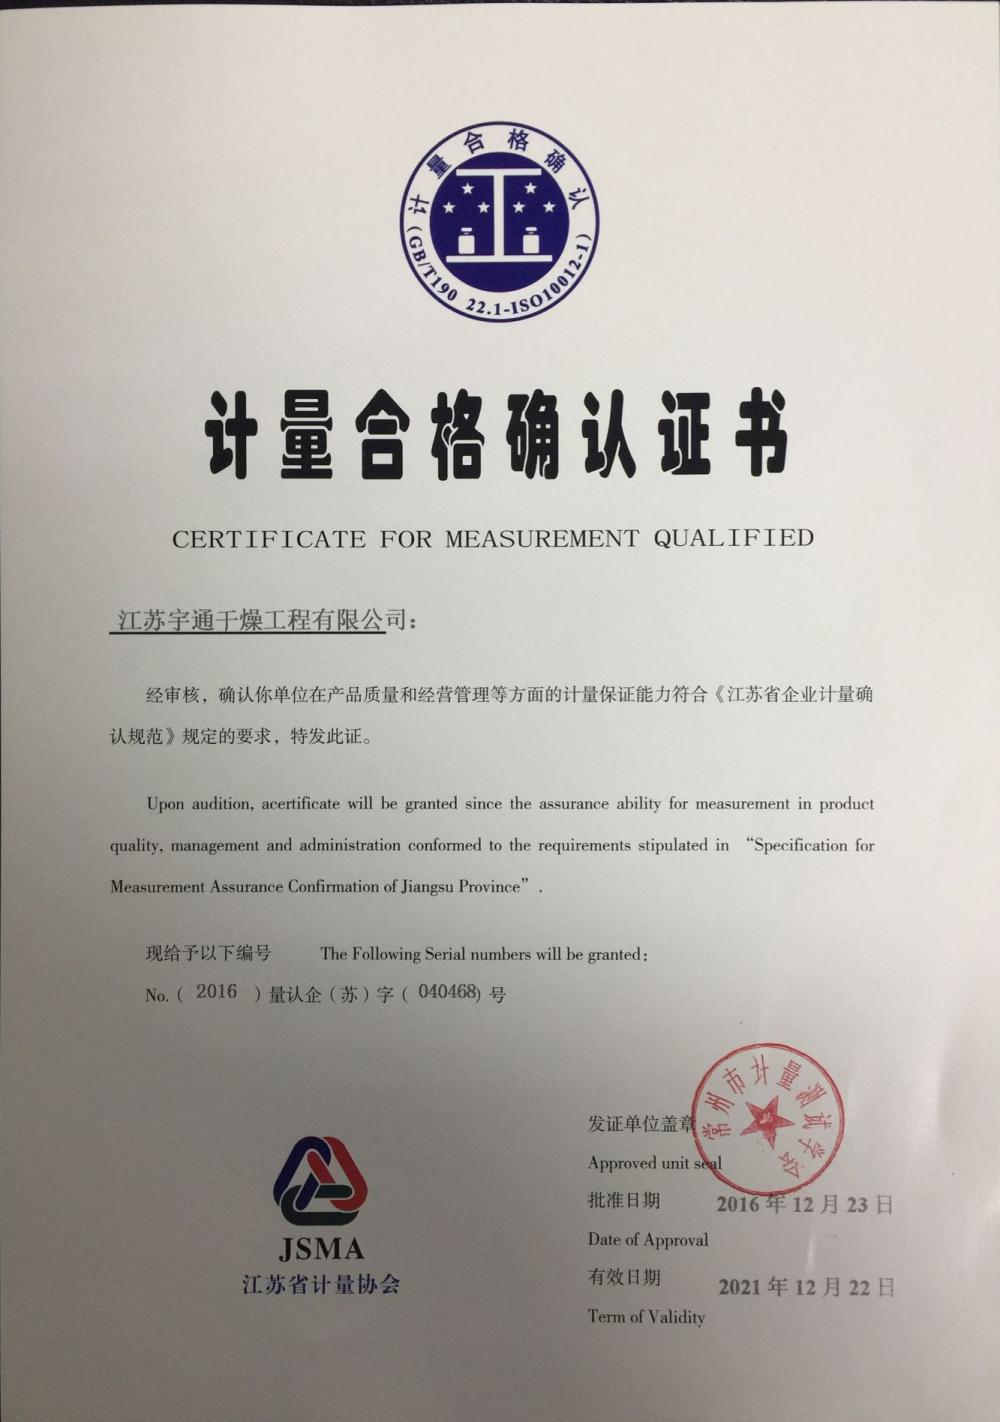 certificate for measurement qualified